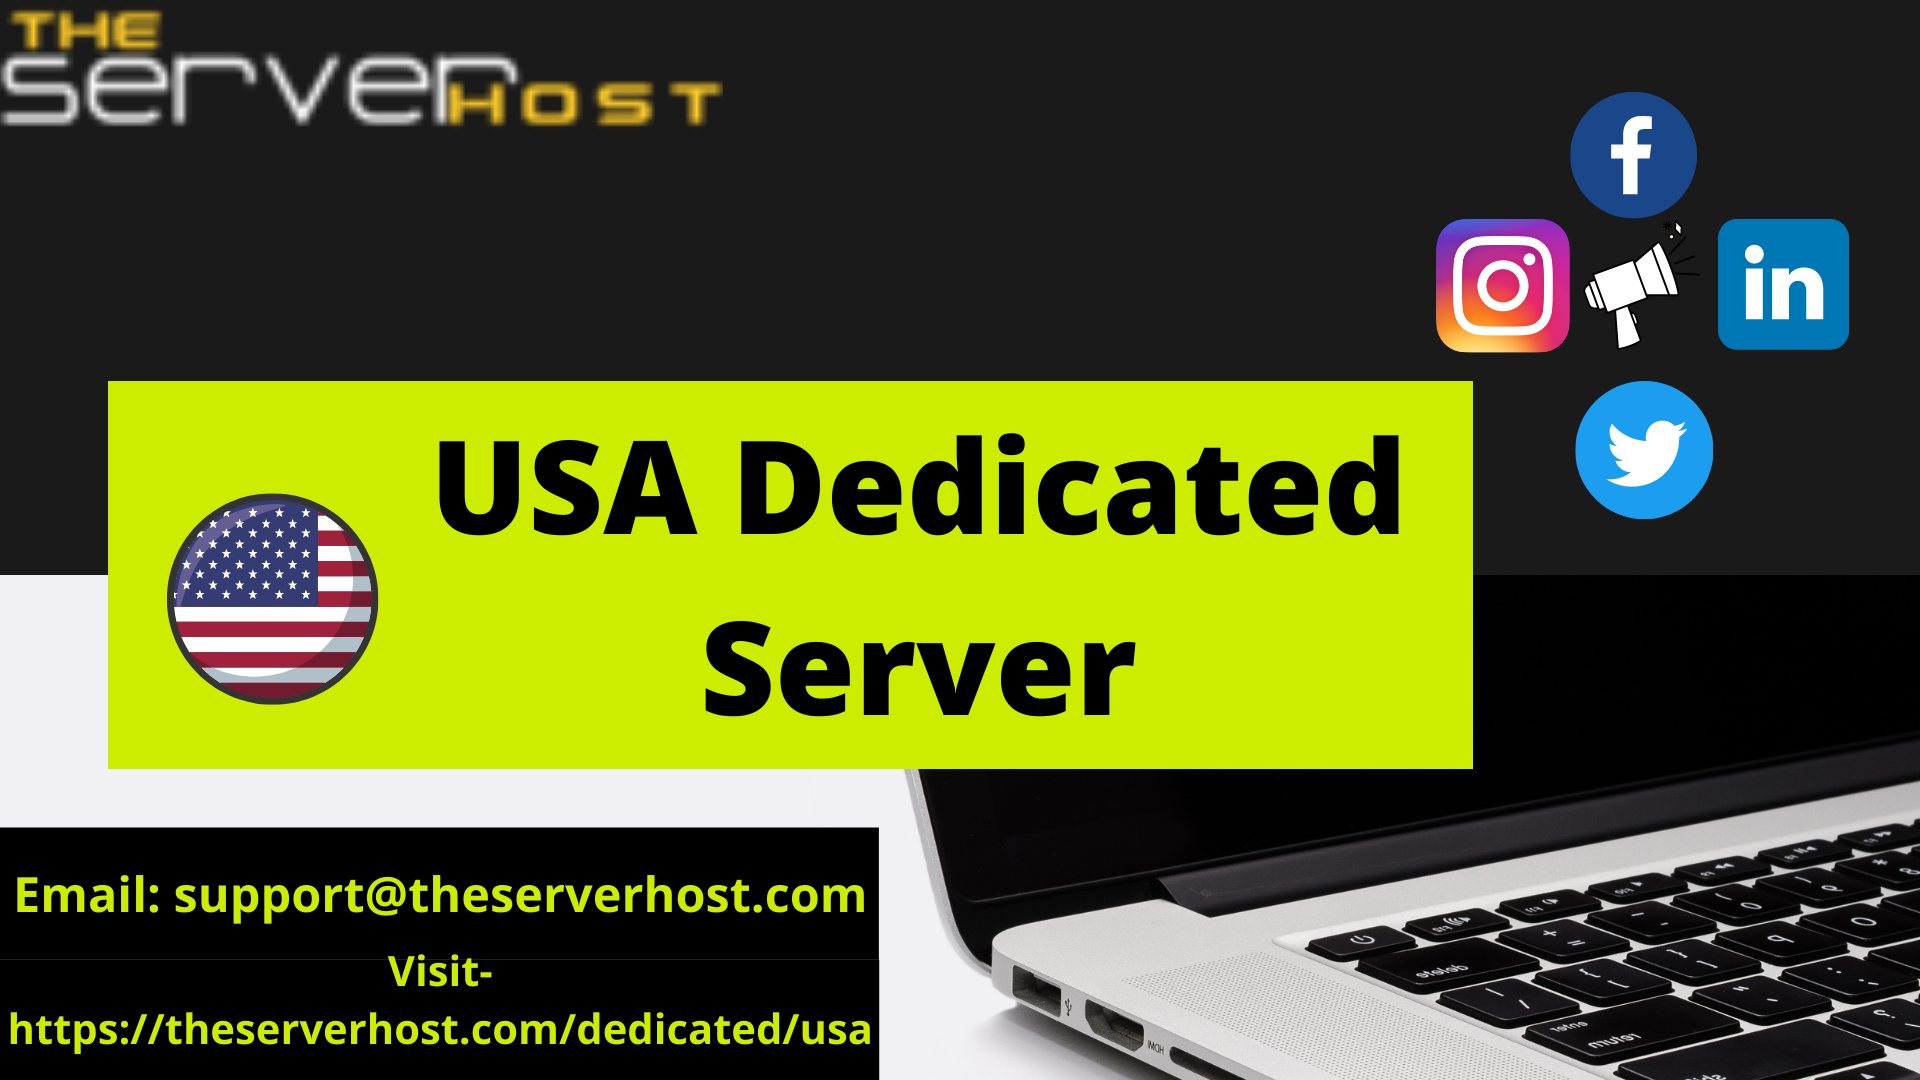 Advantage of Clean IP with no spamRATS record for Transactional Emails by TheServerHost USA, United States of America Dedicated and VPS Server